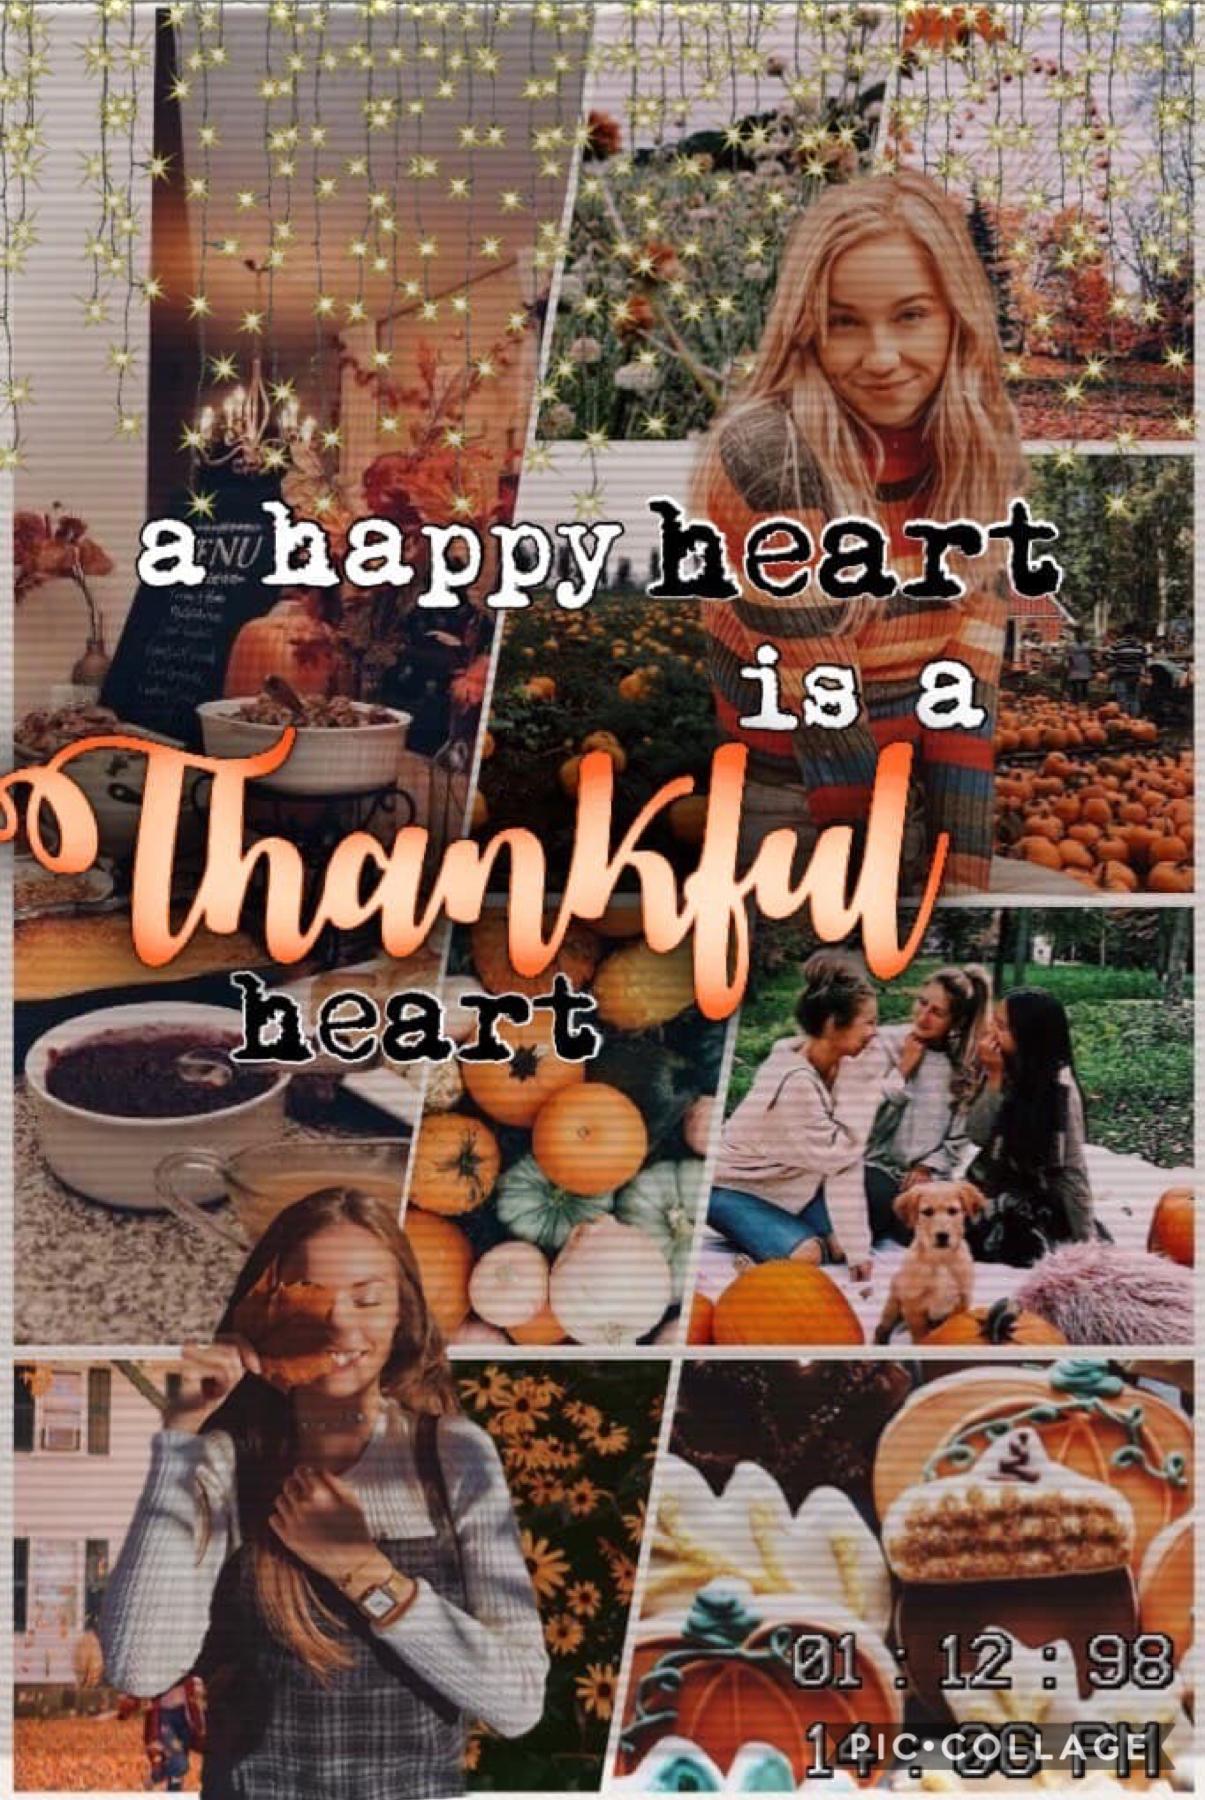 made for -sparklydiamonds-‘s contest! happy thanksgiving💛